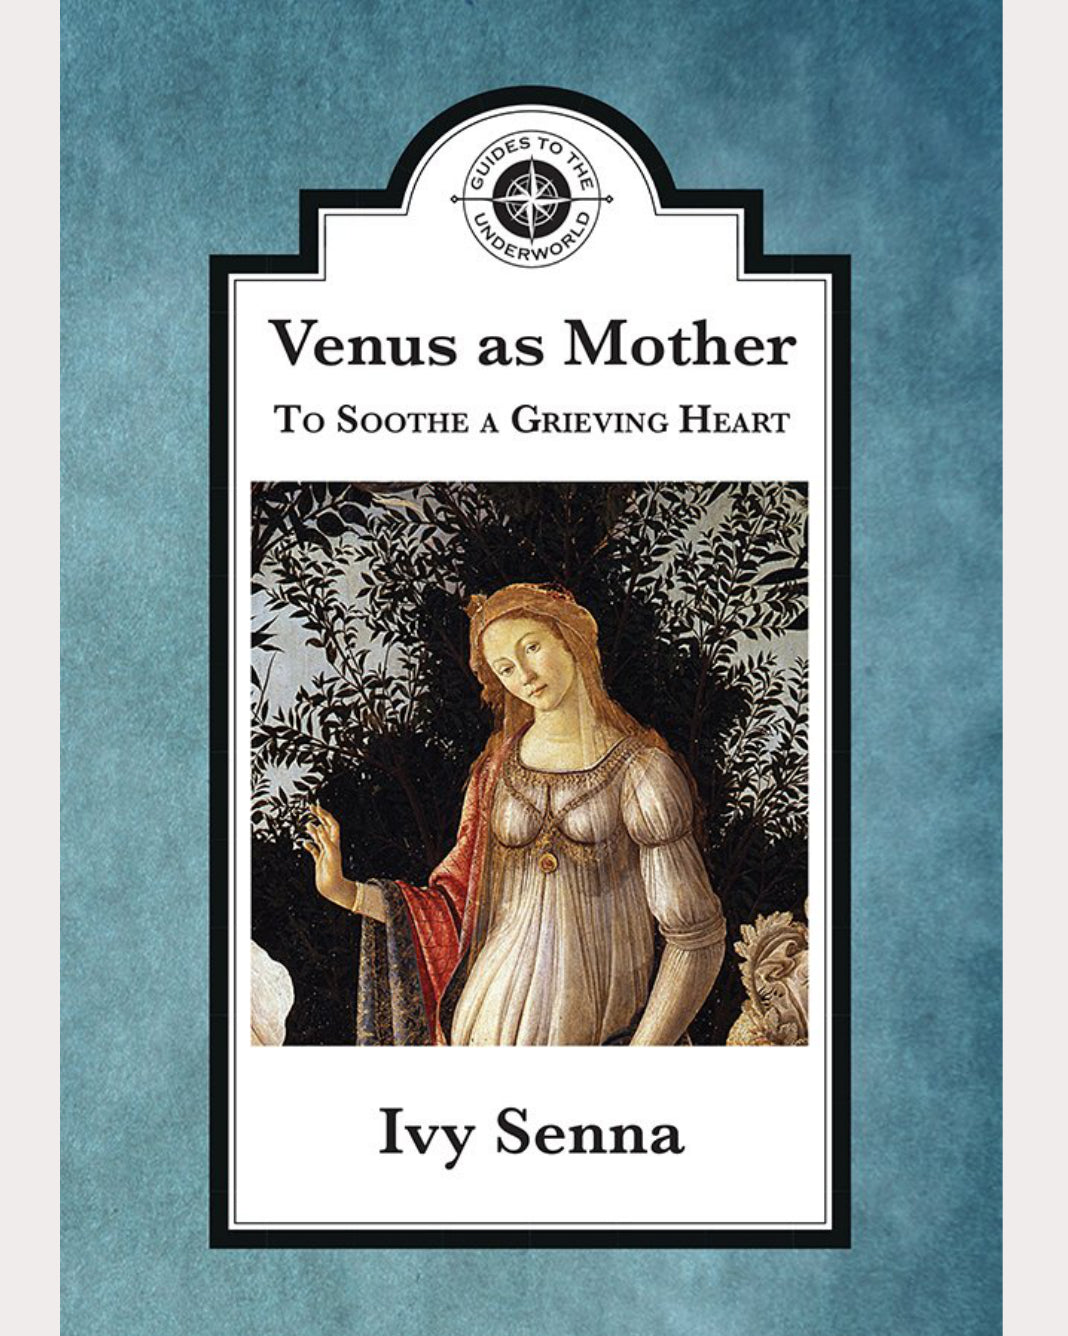 Venus as Mother: To Soothe a Grieving Heart